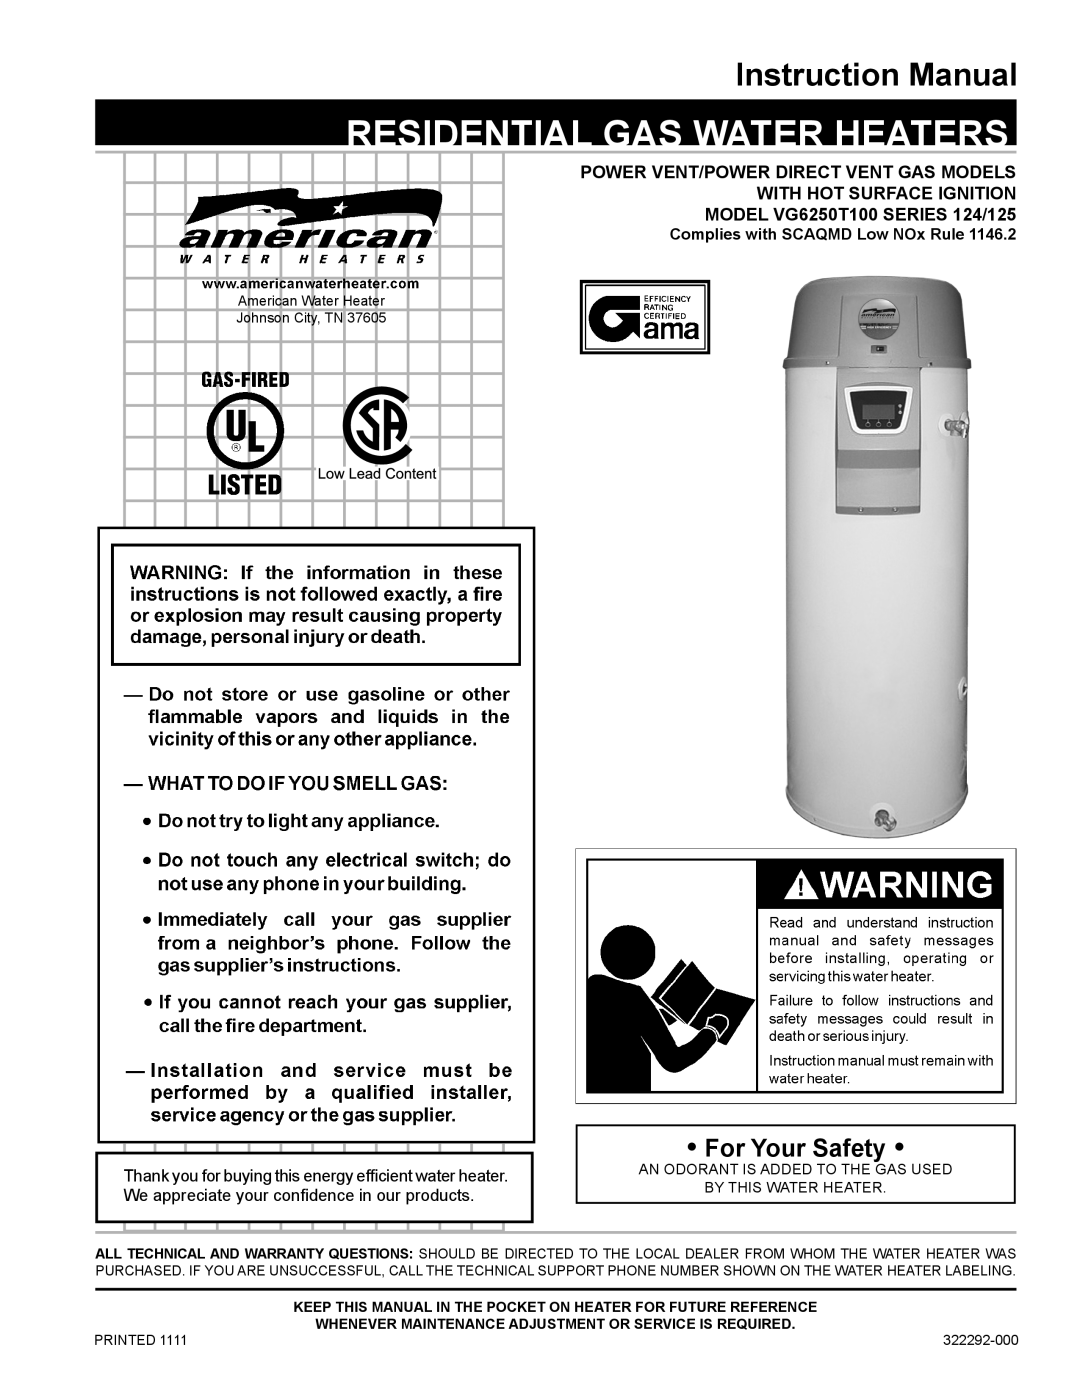 American Water Heater VG6250T100 instruction manual For Your Safety, Residential Gas Water Heaters, Instruction Manual 